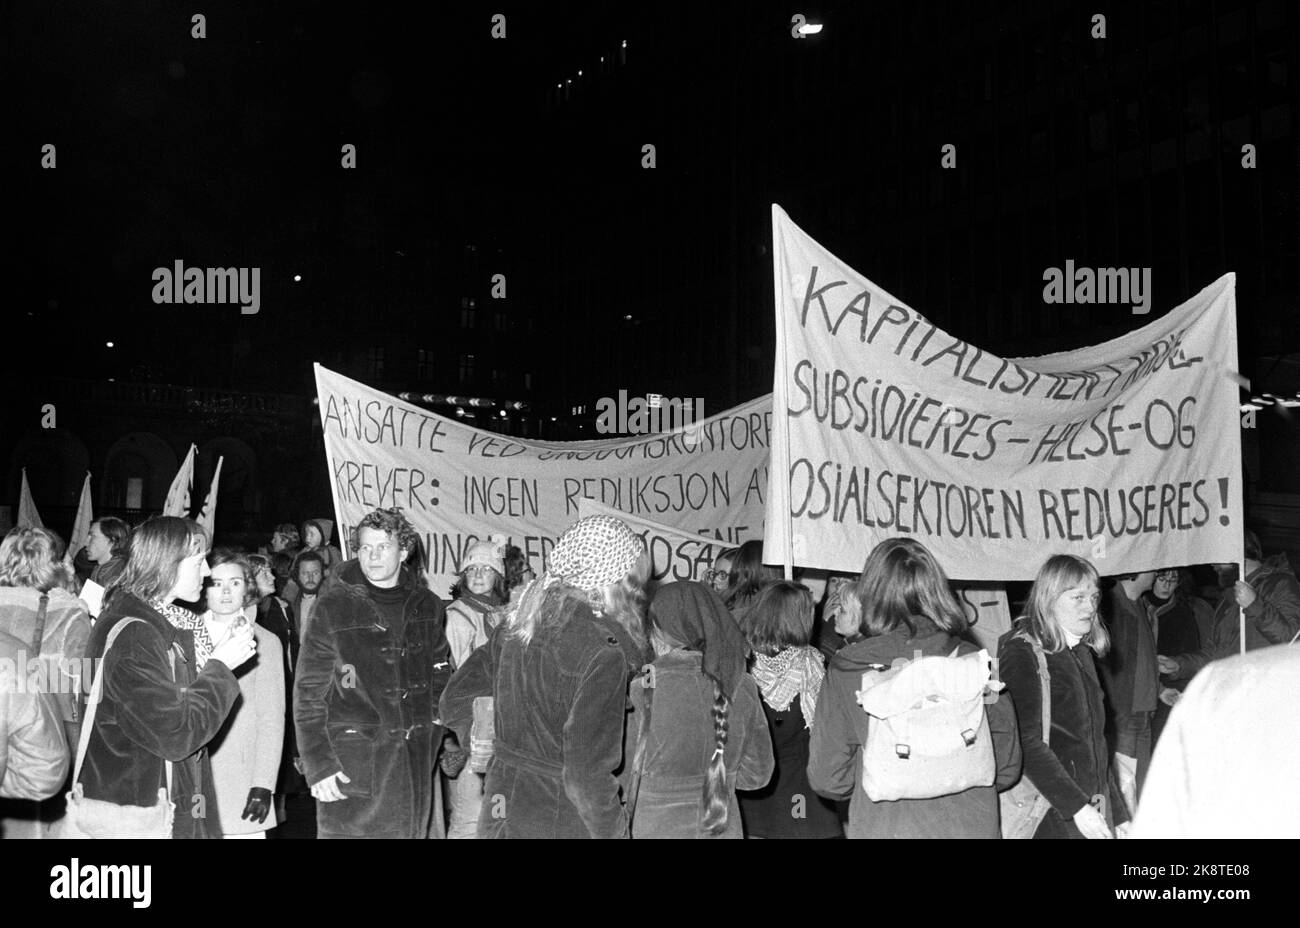 Oslo 19751106. Demonstration against the state budget, the 'crisis budget' in the health and social sector in Oslo. Slogans: 'Capitalists are subsidized, the health and social sector is reduced'. Photo Arild Hordnes / NTB / NTB Stock Photo